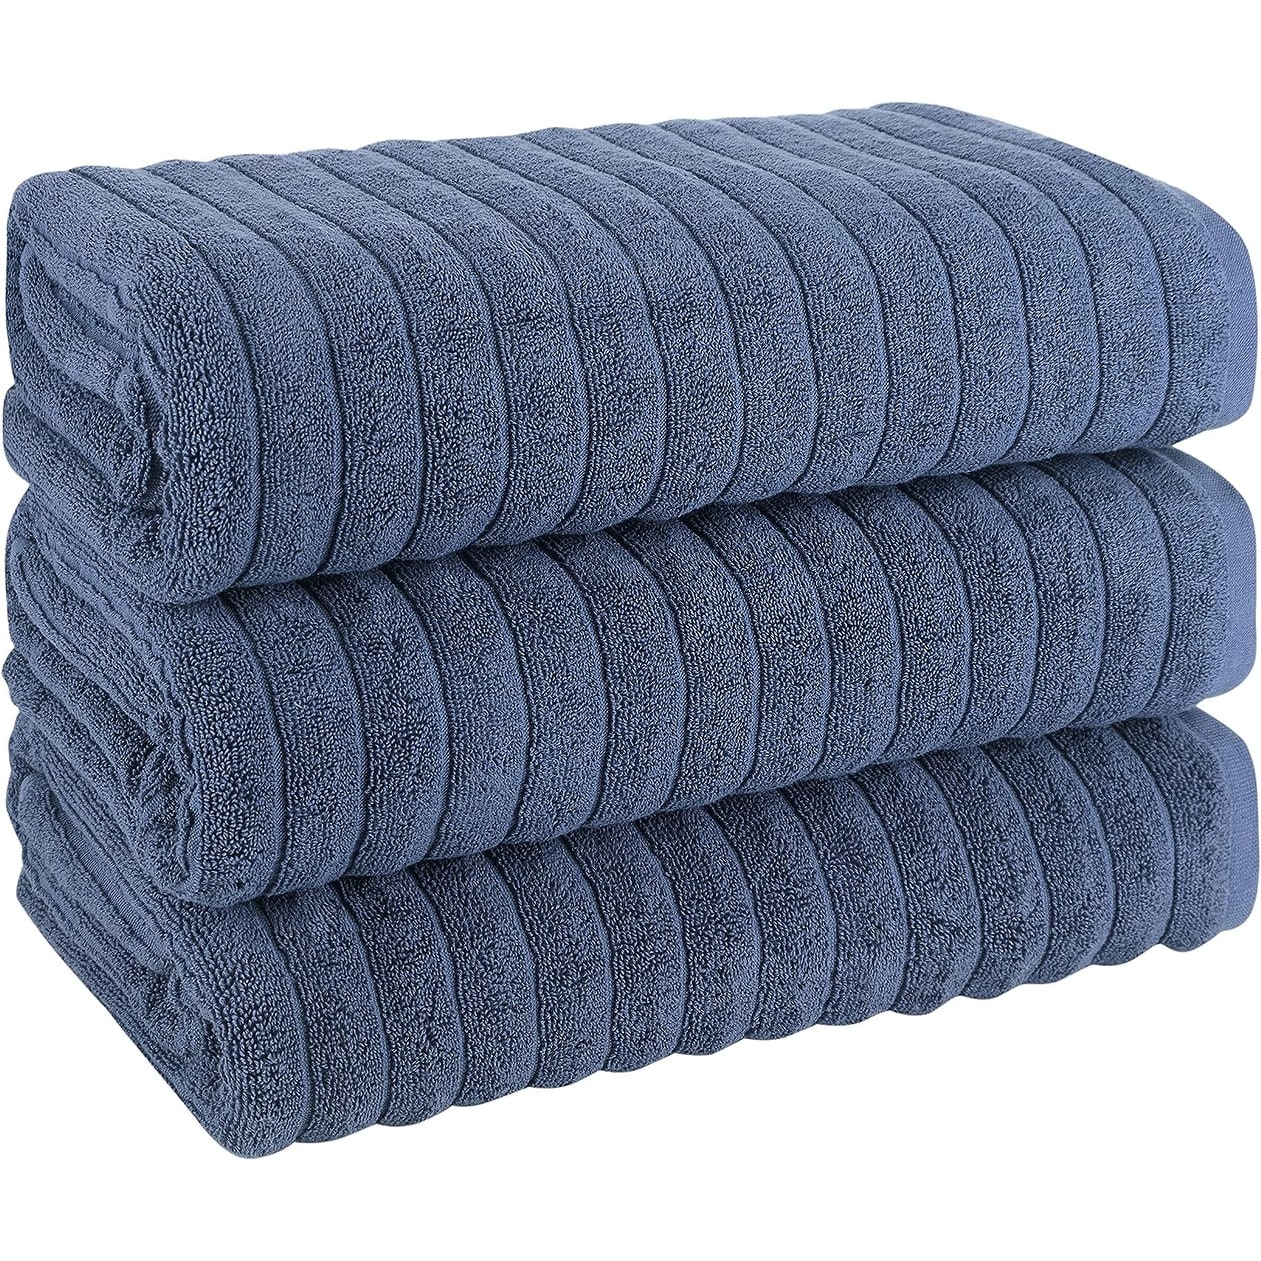 Authentic Hotel and Spa Omni Turkish Cotton Terry Oversized Bath Sheet  Towels (Set of 2) - On Sale - Bed Bath & Beyond - 12855990